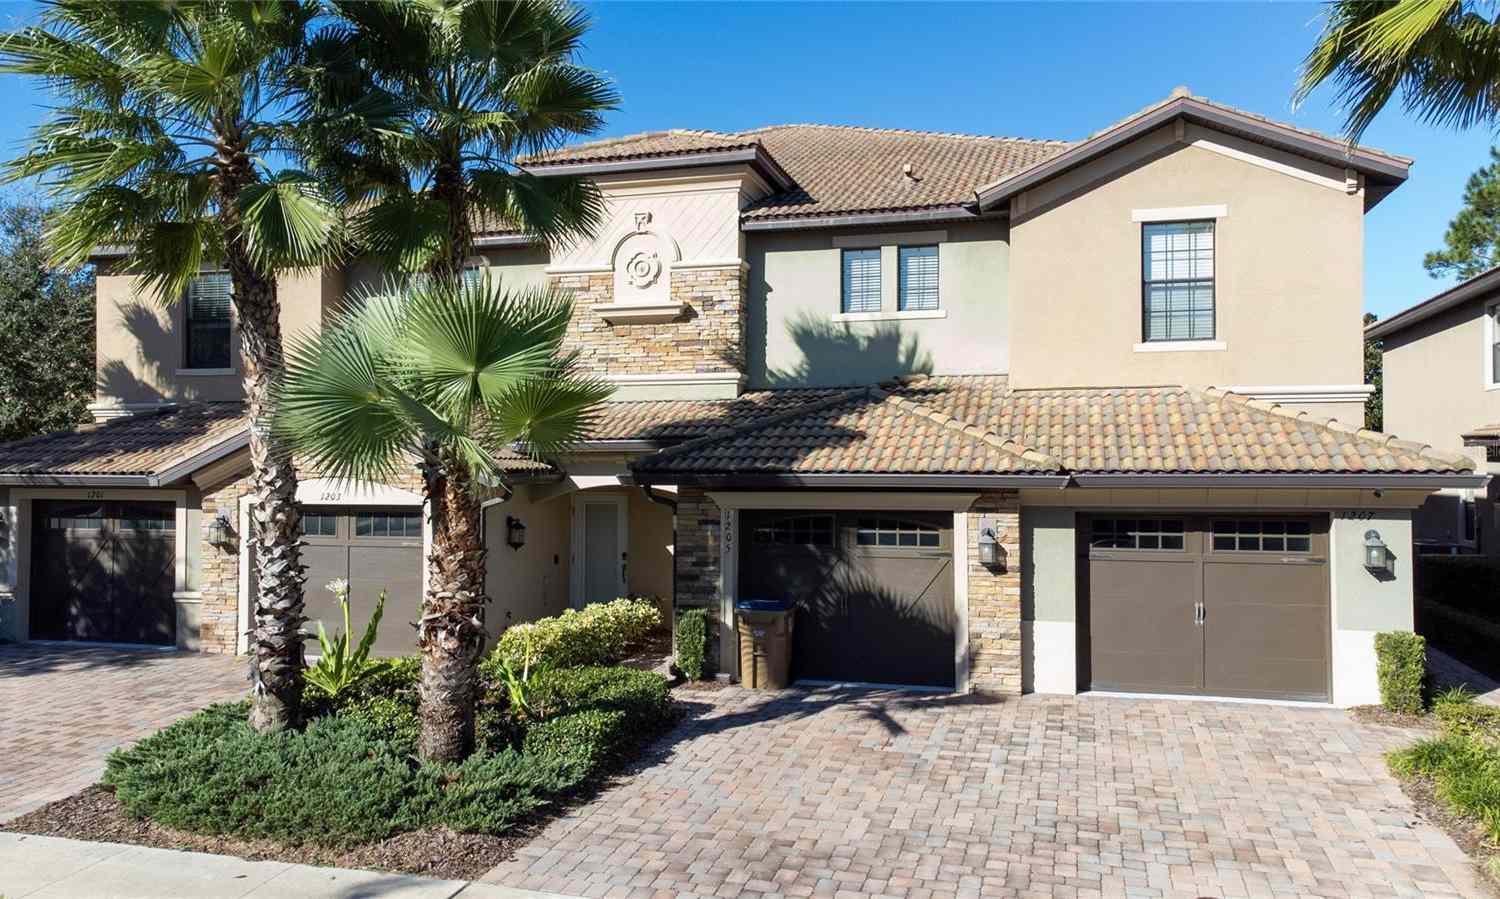 Houses for Rent by Owner in Champions Gate, FL - 1 Rentals